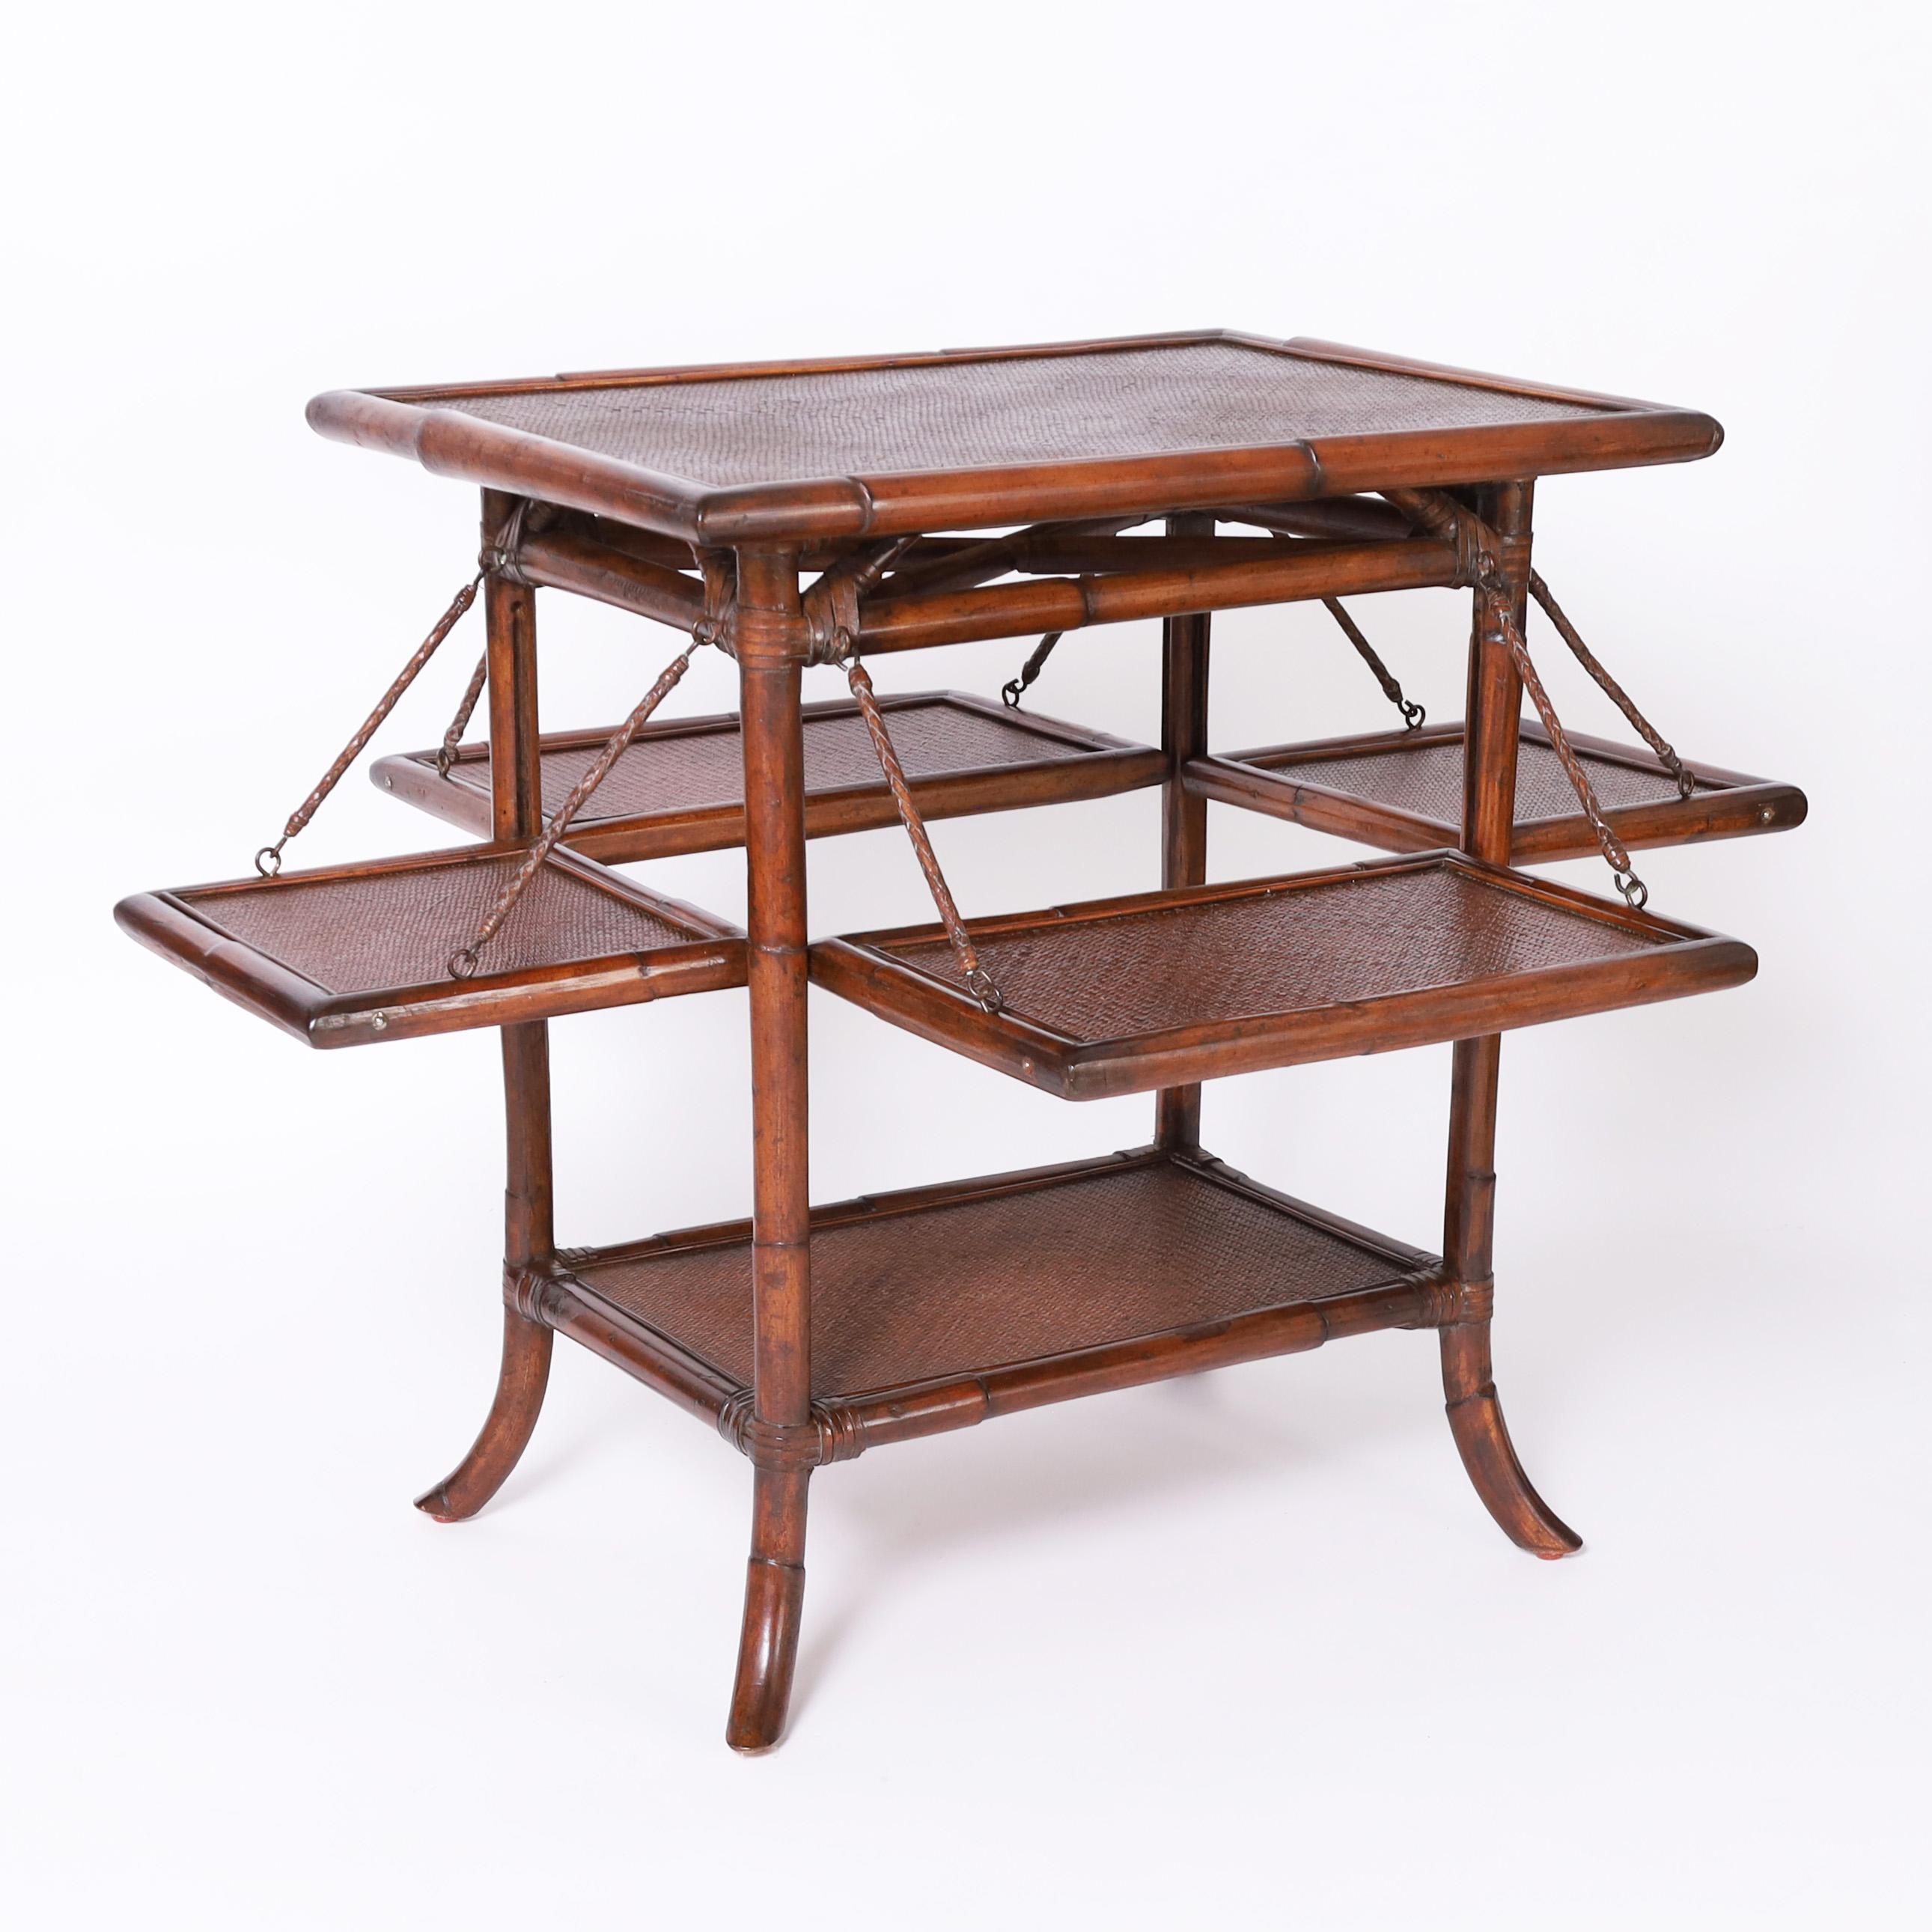 Standout pair of mid century British Colonial style stands or tables crafted with bamboo frames having grasscloth tops and lower tiers with four fold out trays having grasscloth panels uniting form and function.

Measurements with shelves extended: